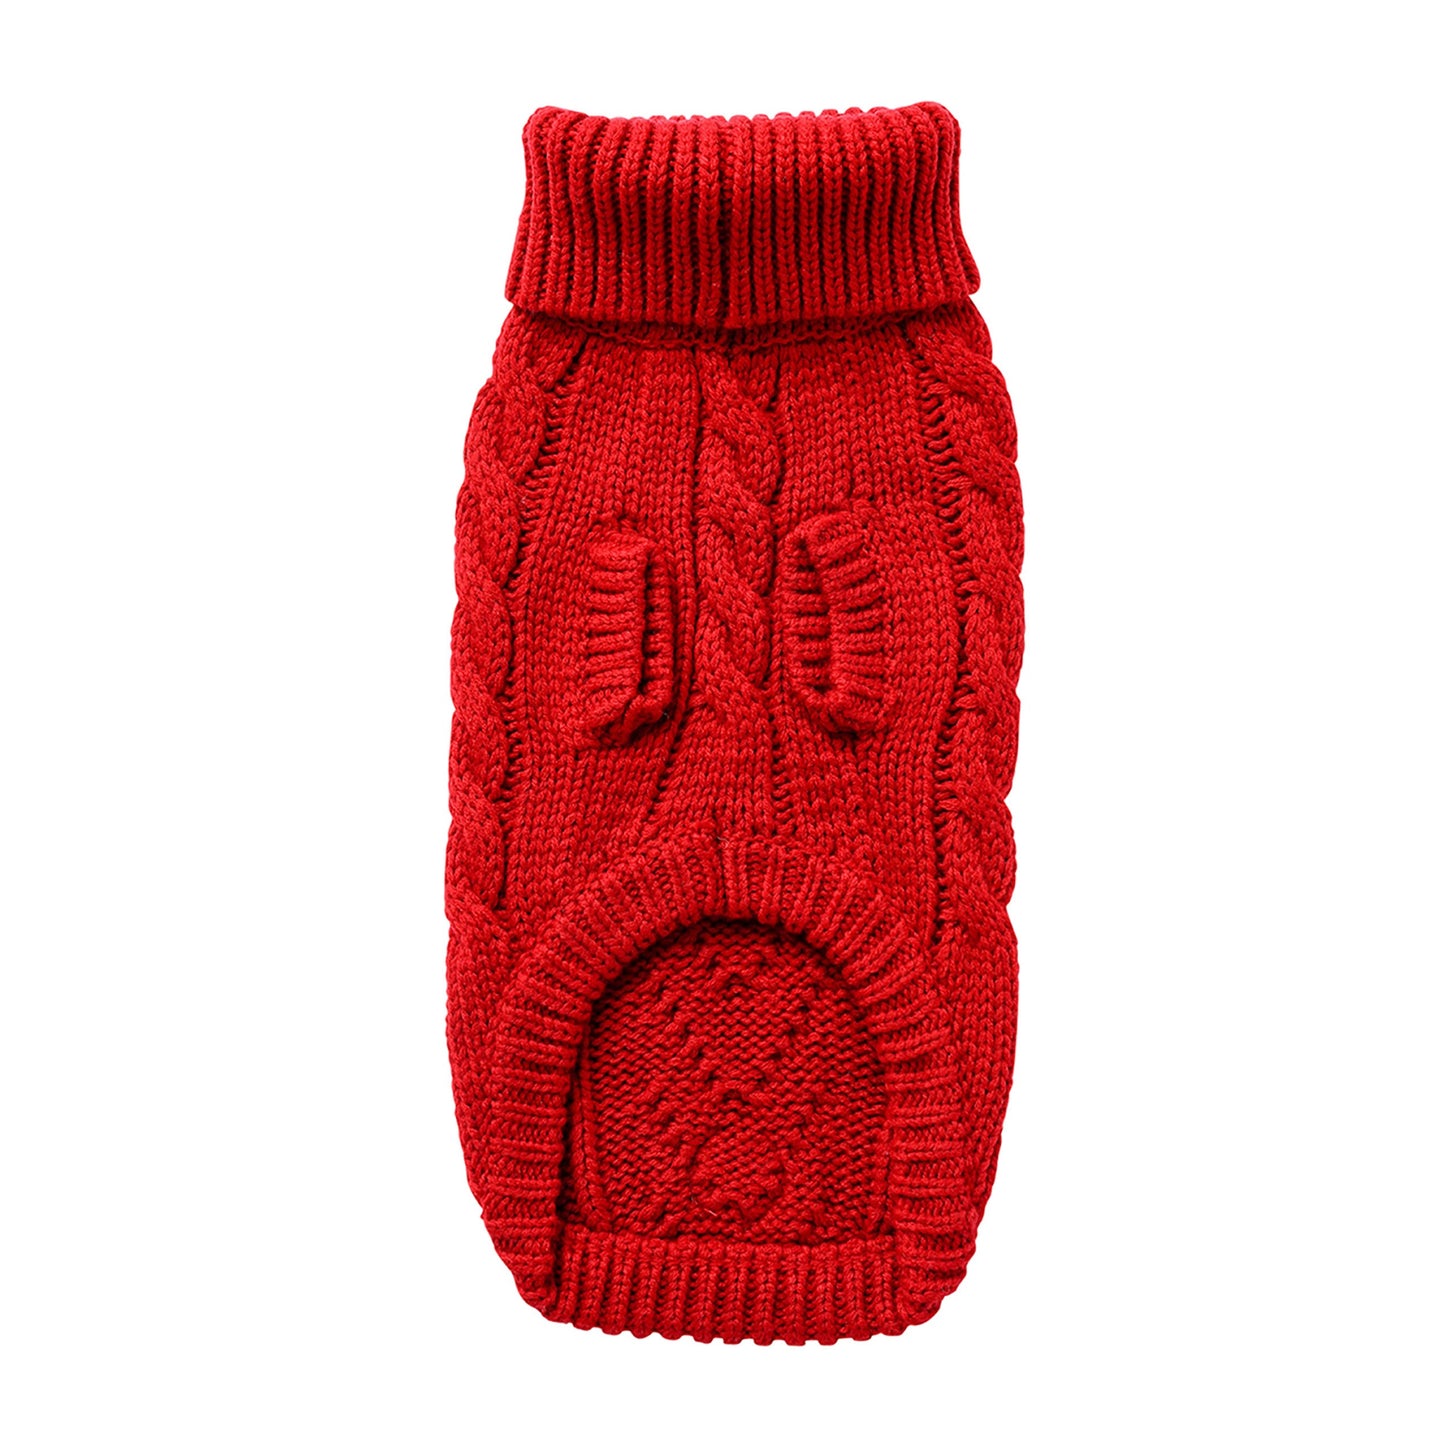 Red Chalet Dog Sweater